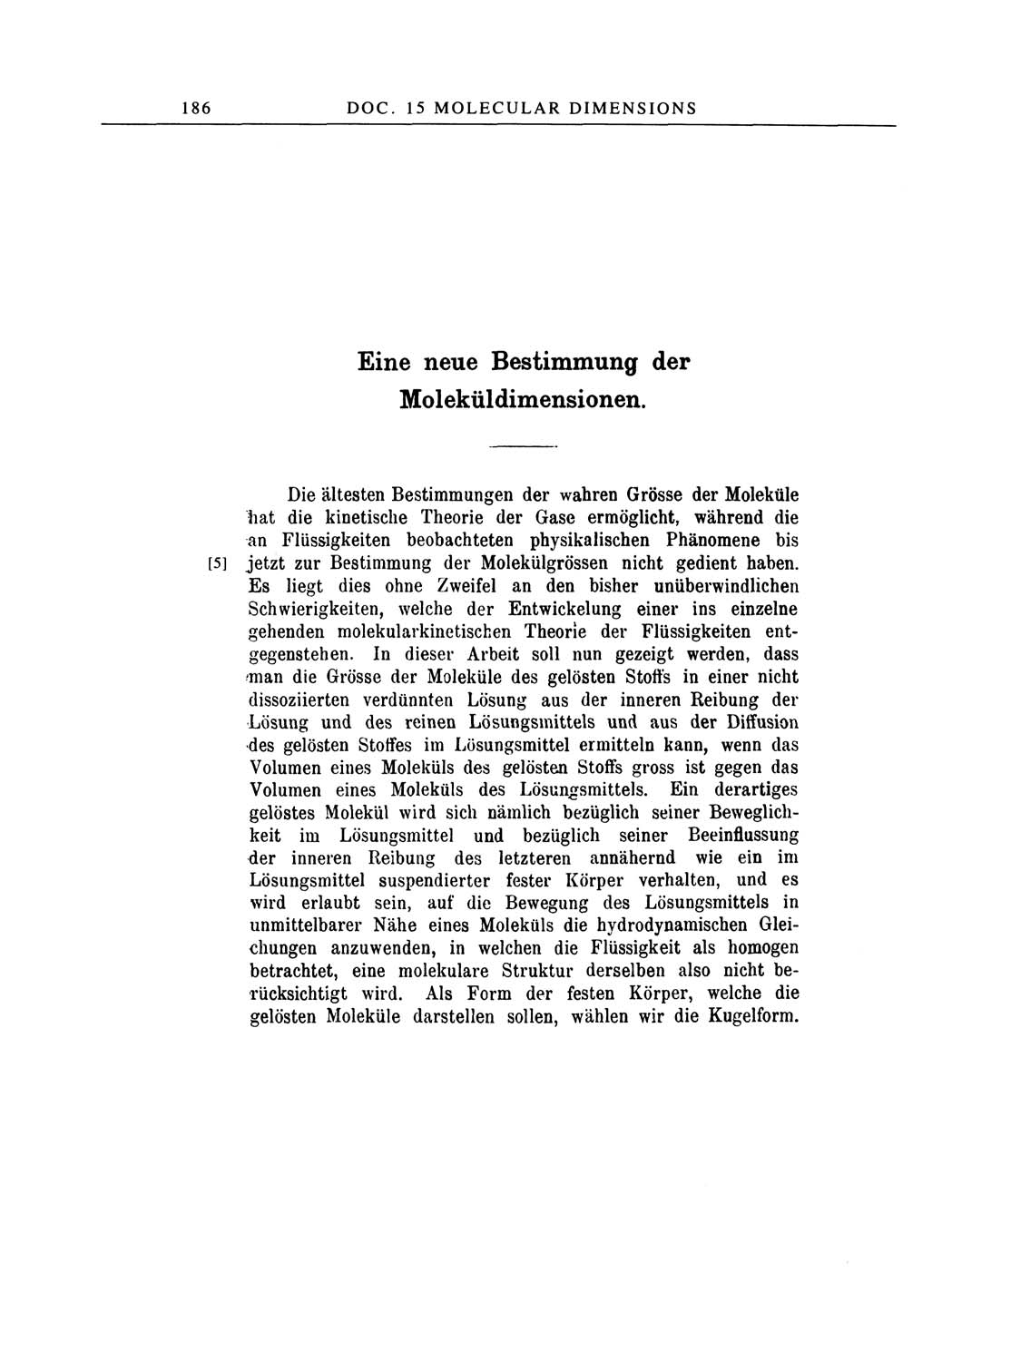 Volume 2: The Swiss Years: Writings, 1900-1909 page 186